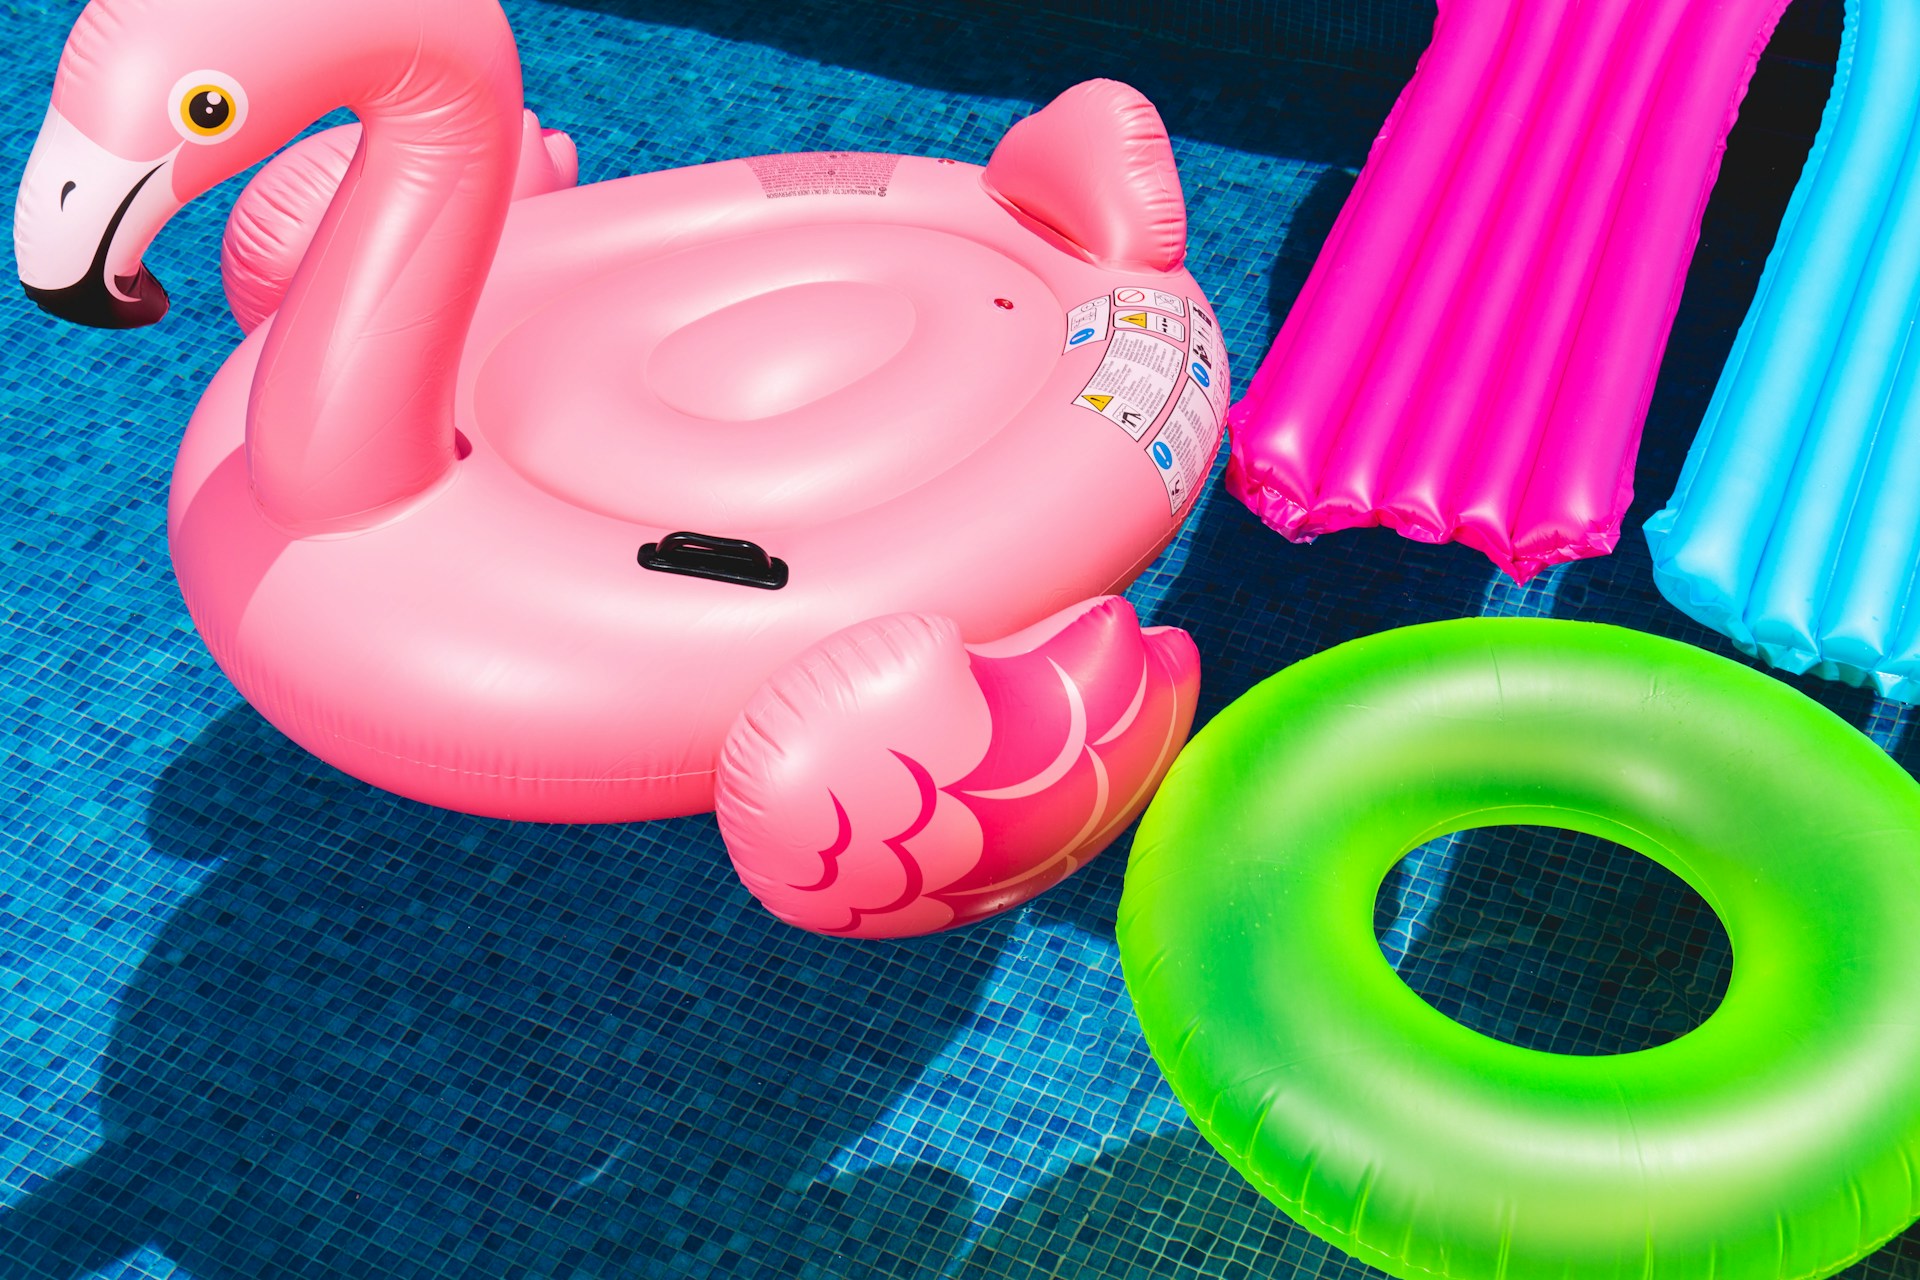 Pool with inflatables. Image by Unsplash